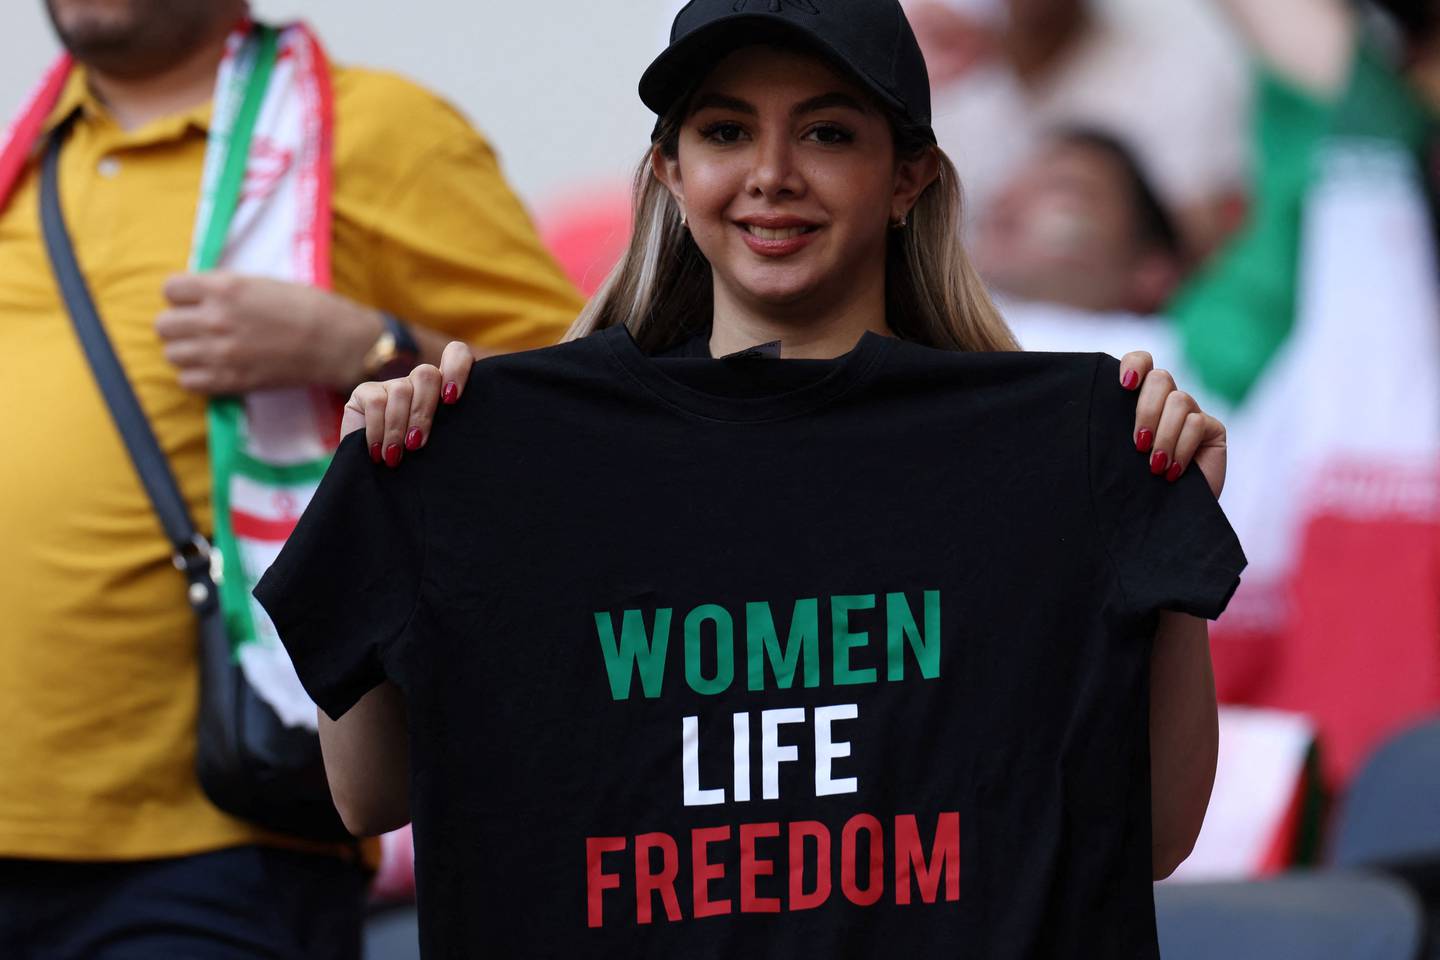 A woman holds a t-shirt with a slogan that reads 'Woman life freedom' during a football match at the Qatar World Cup. AFP